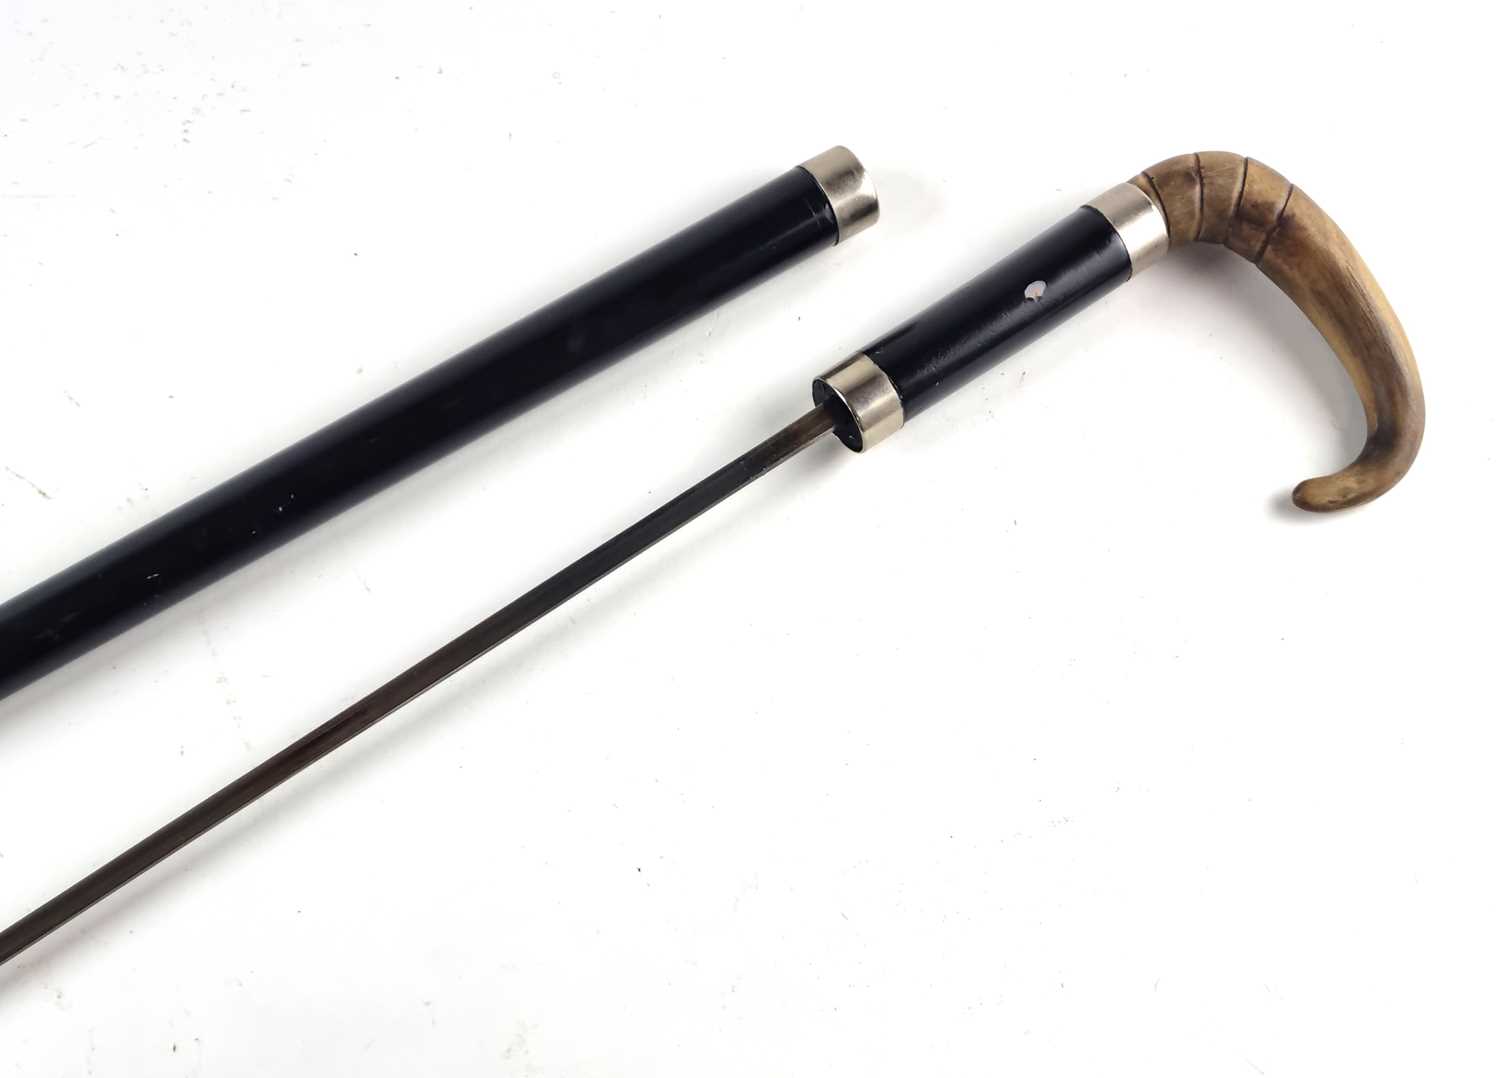 Late-19th century lacquered sword cane